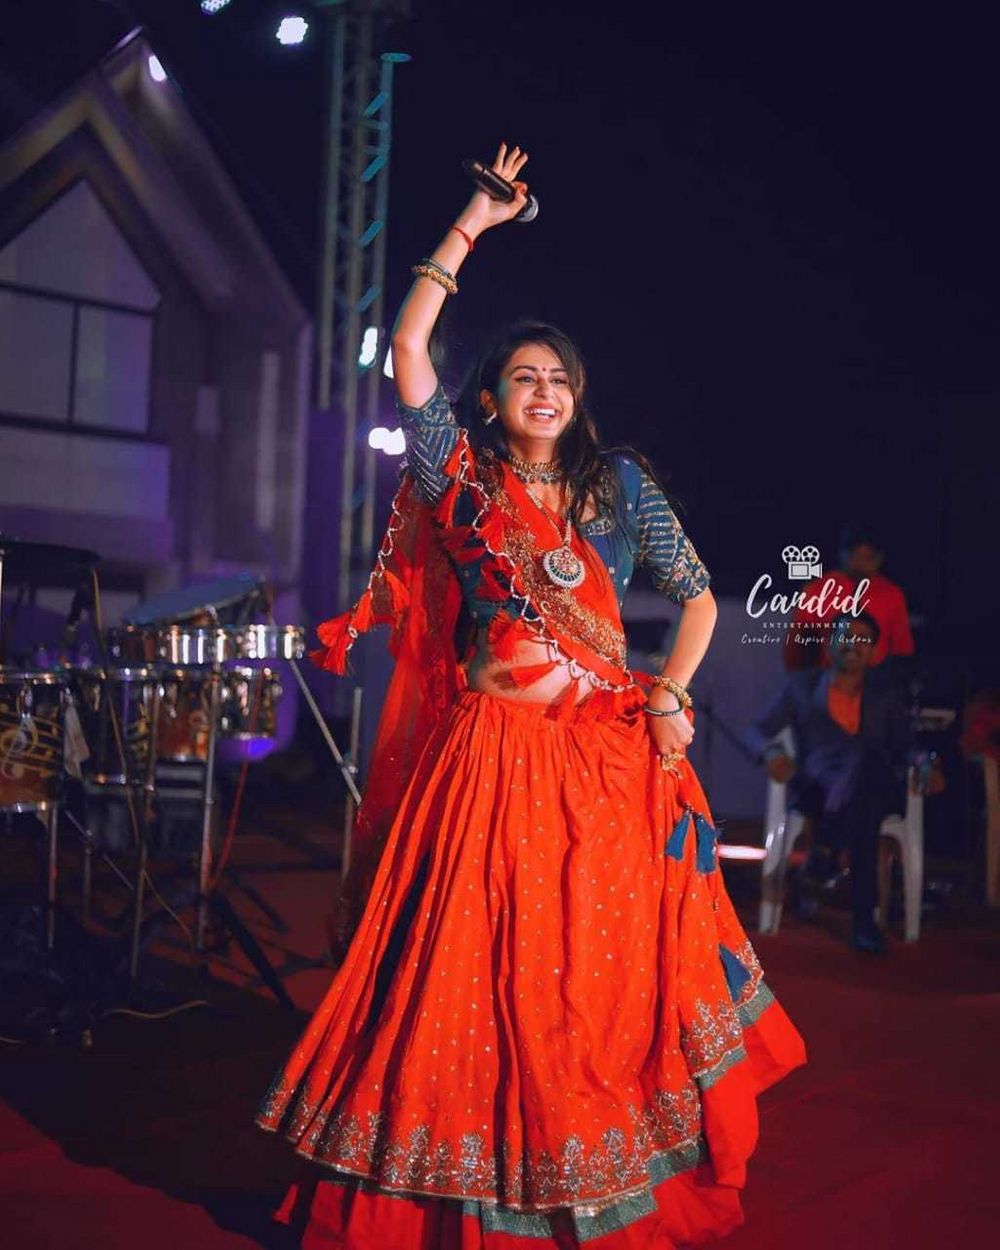 Photo From Kinjal Dave Concert - By Candid Entertainment